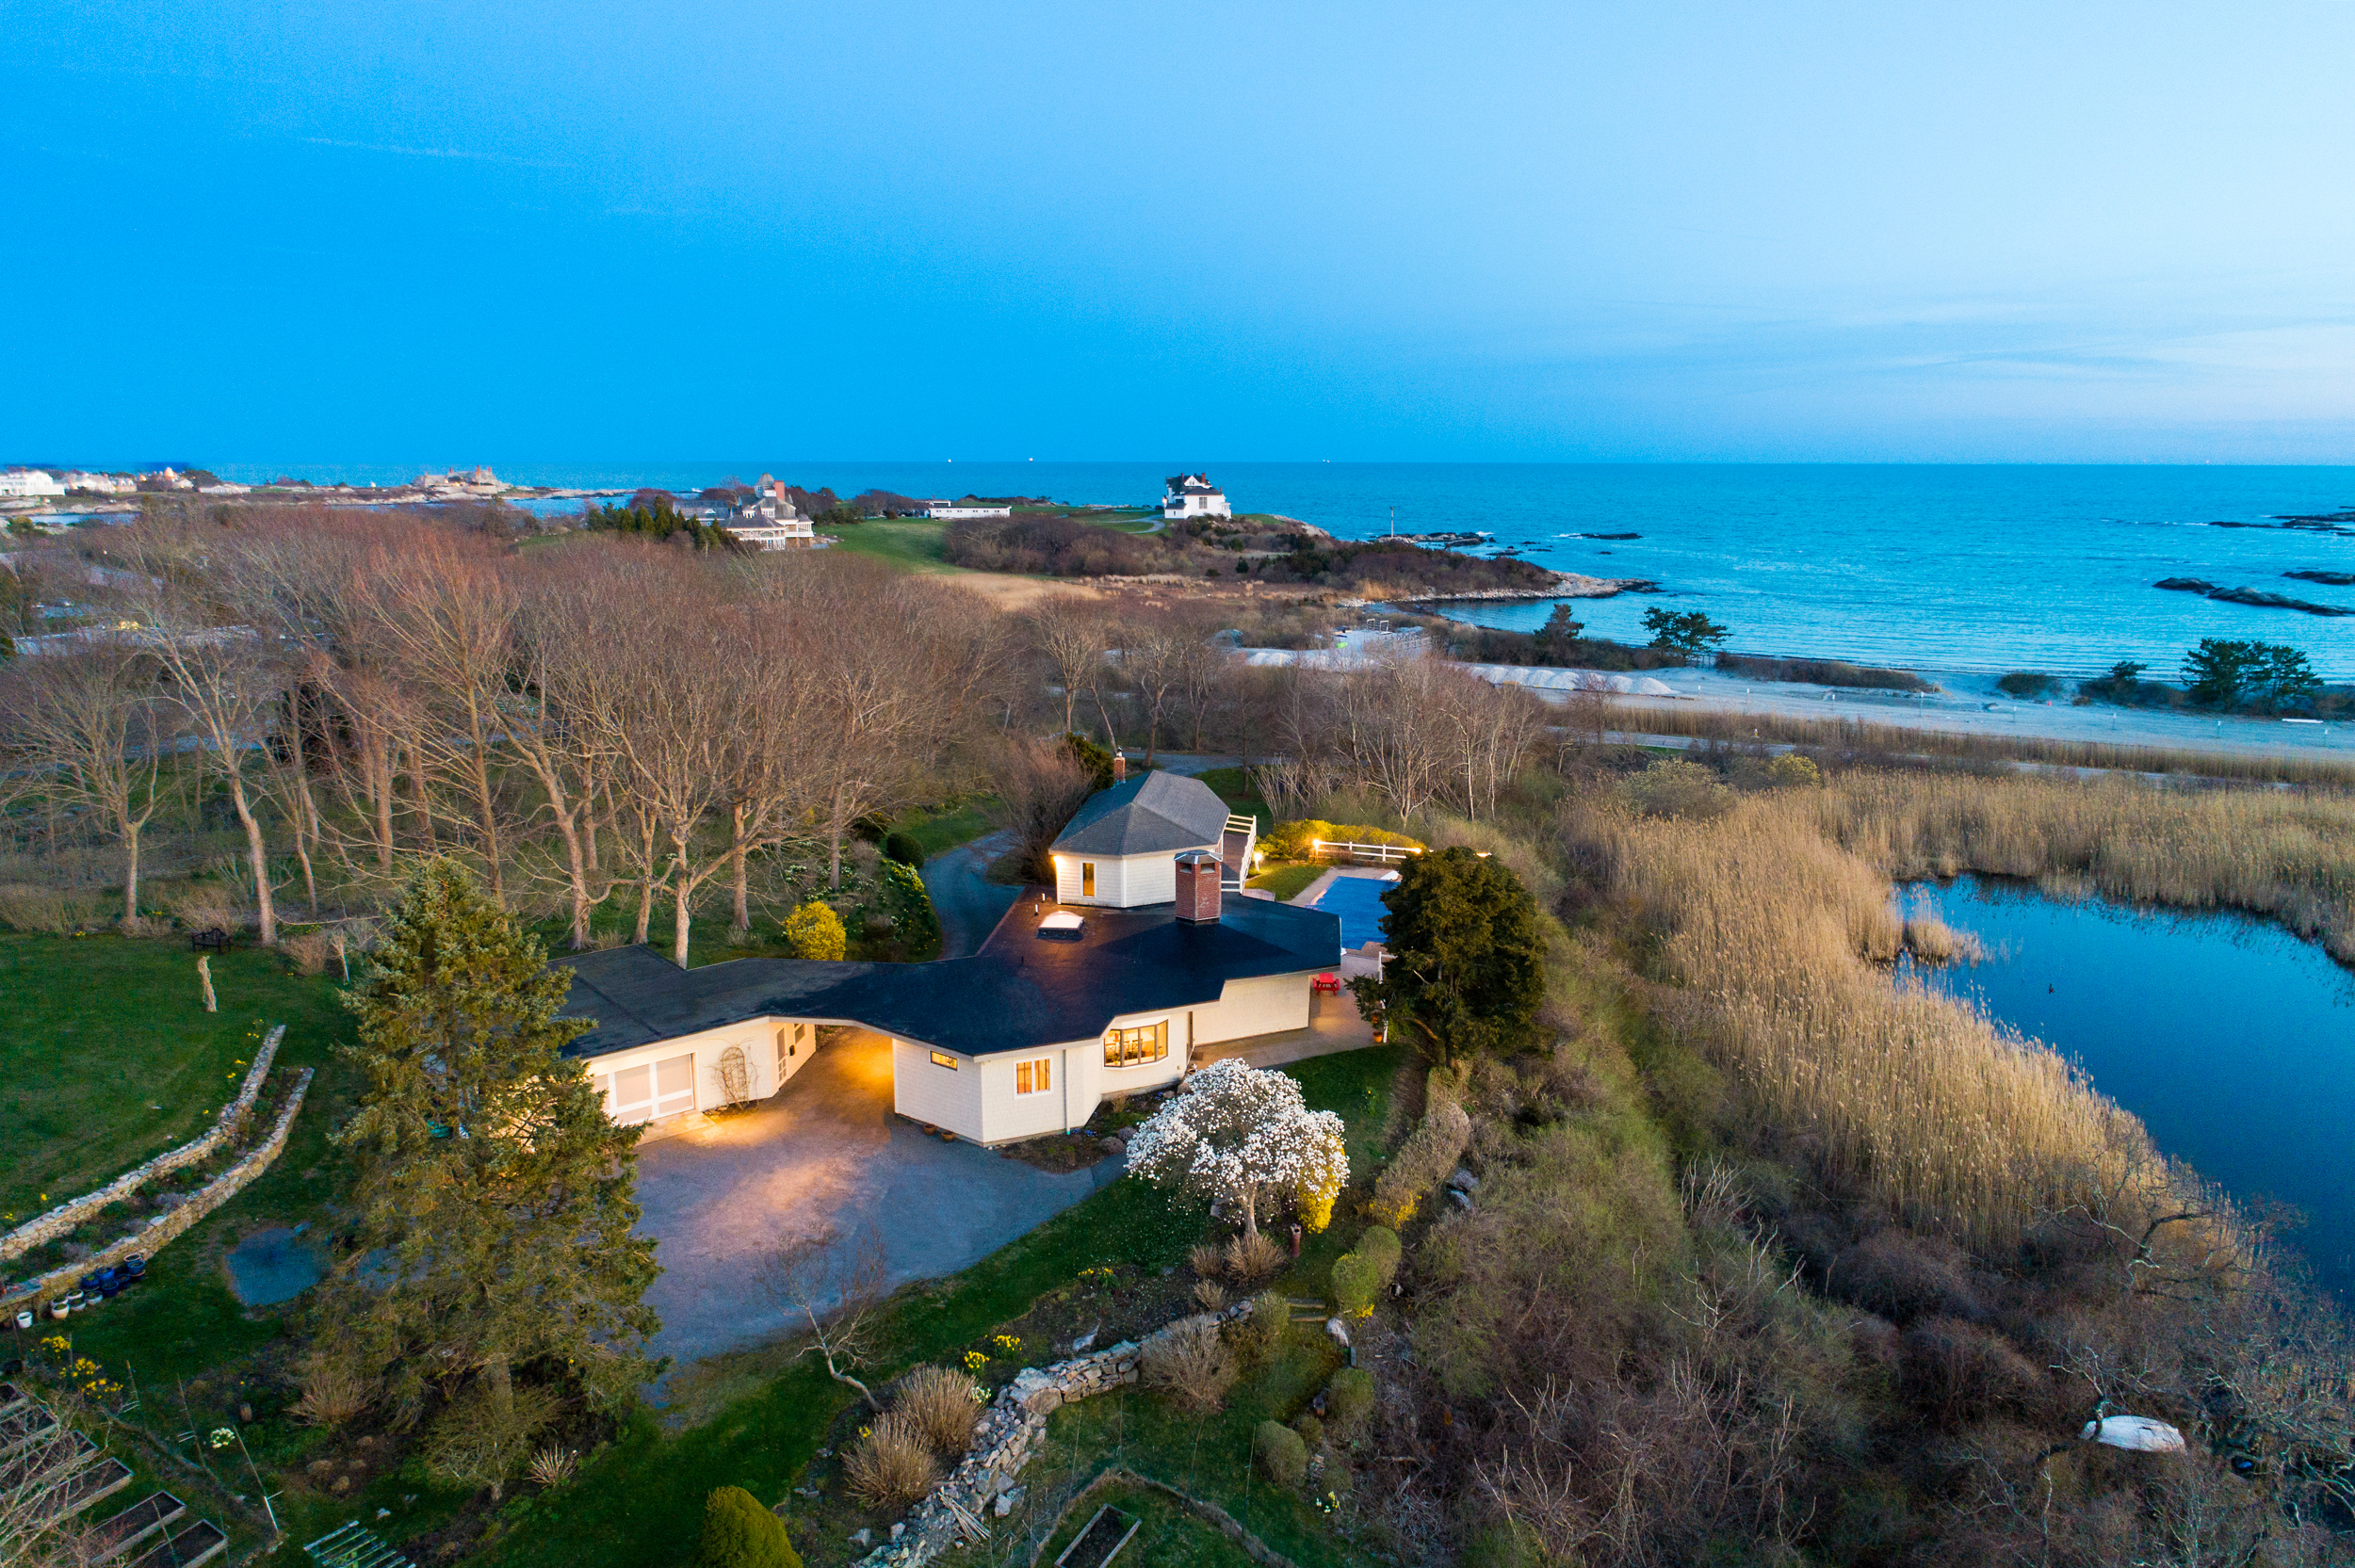 10 MOST EXPENSIVE HOMES FOR SALE IN NEWPORT, RI